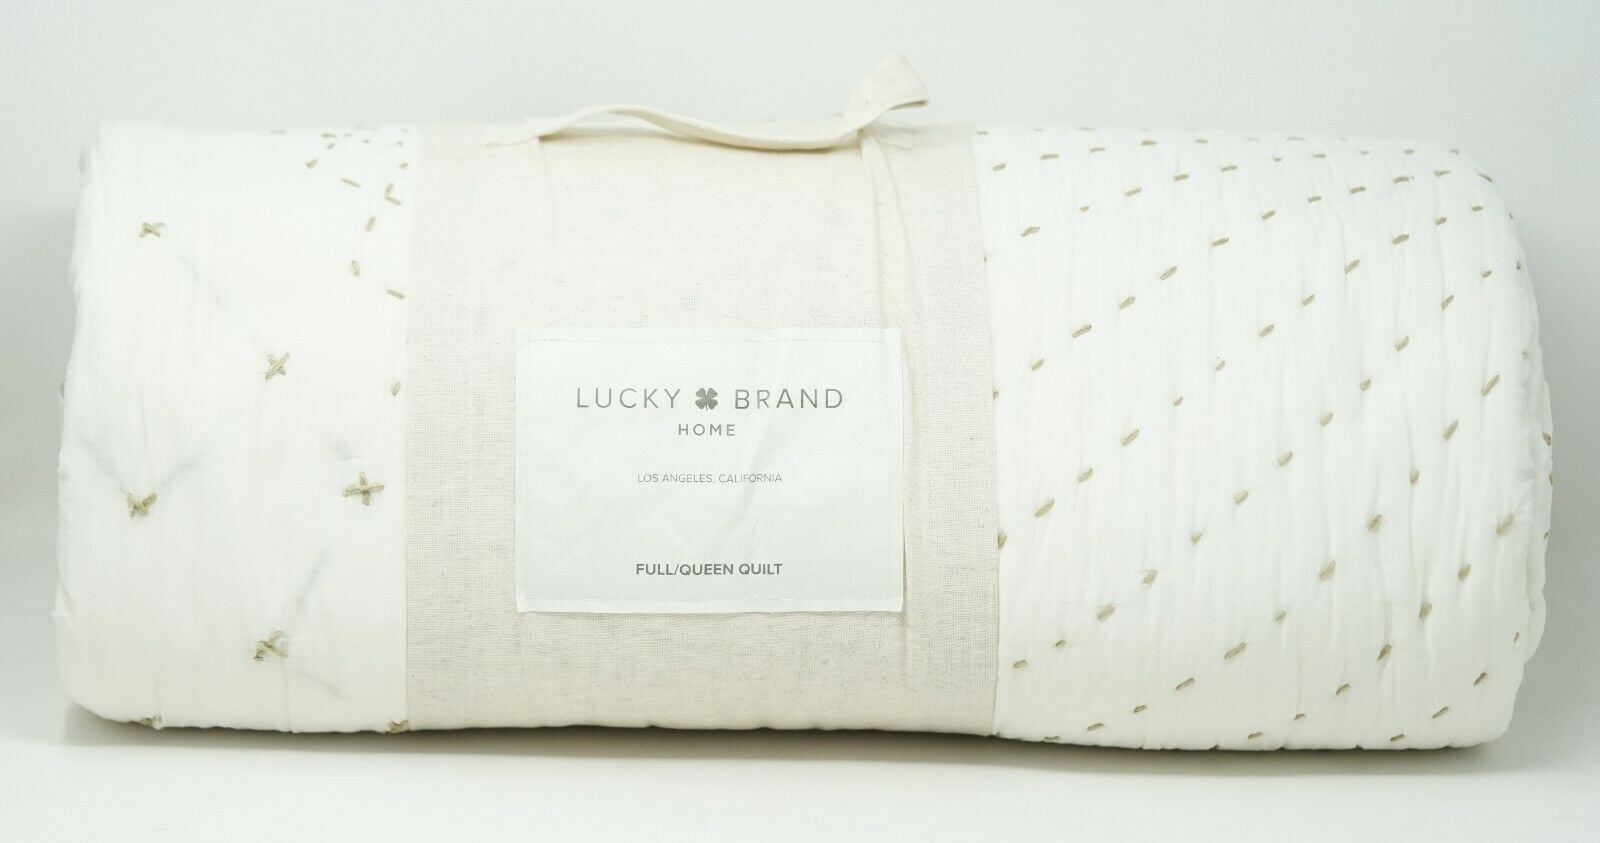 Lucky Brand Sashiko 100% Cotton Handcrafted Quilt - FULL / QUEEN - Ivory